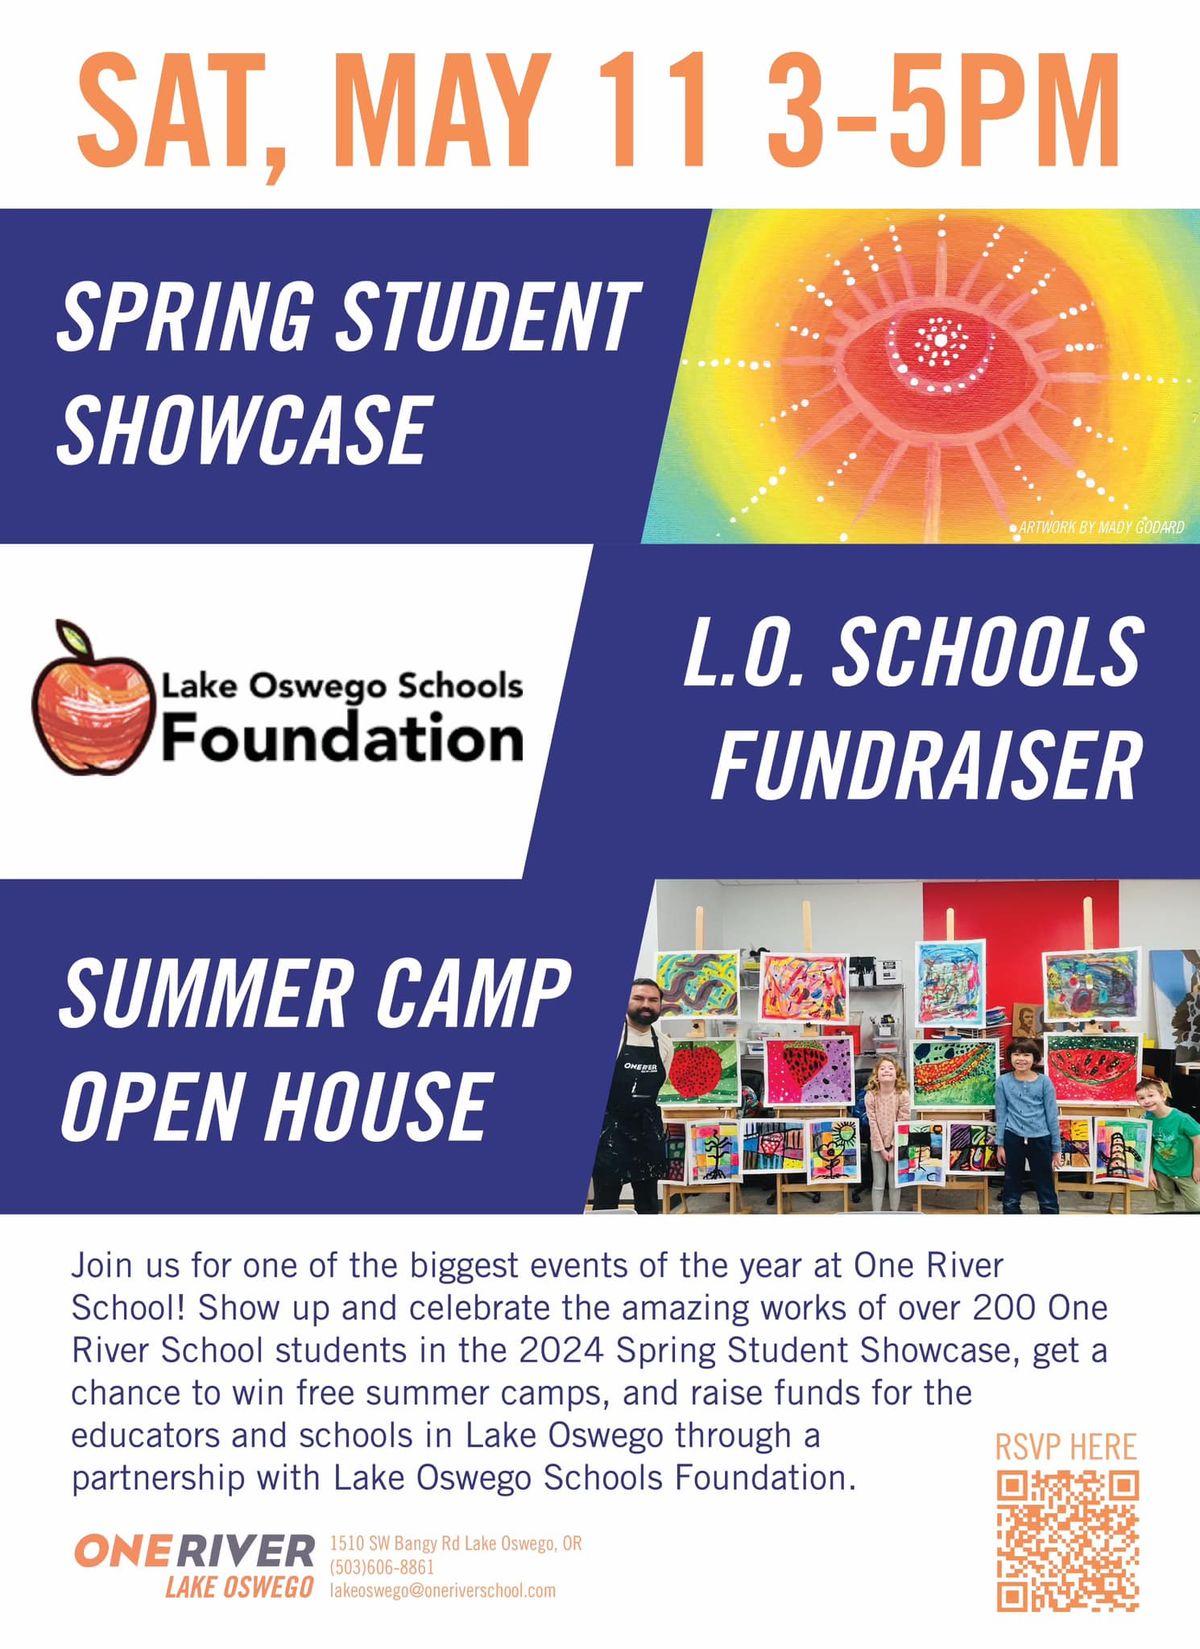 One River School Student Showcase benefiting LOSF